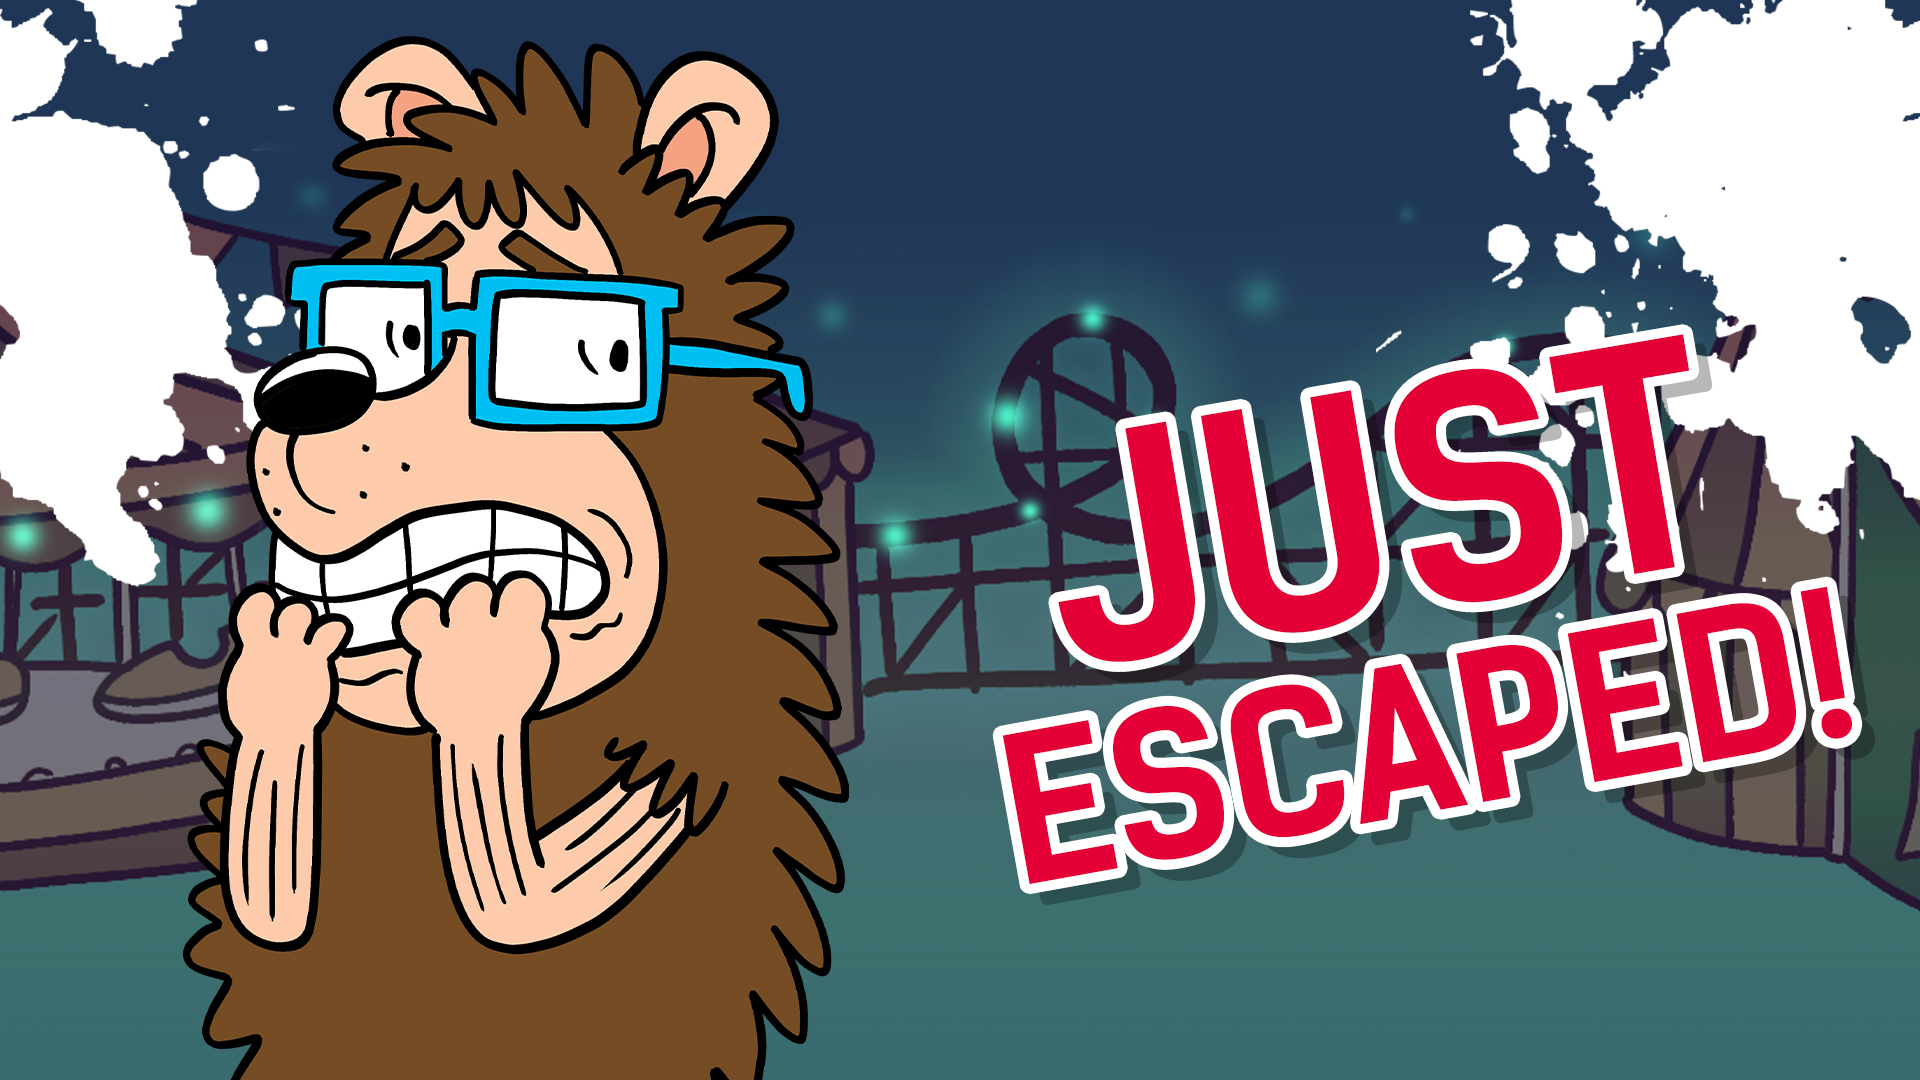 Result: Just escaped